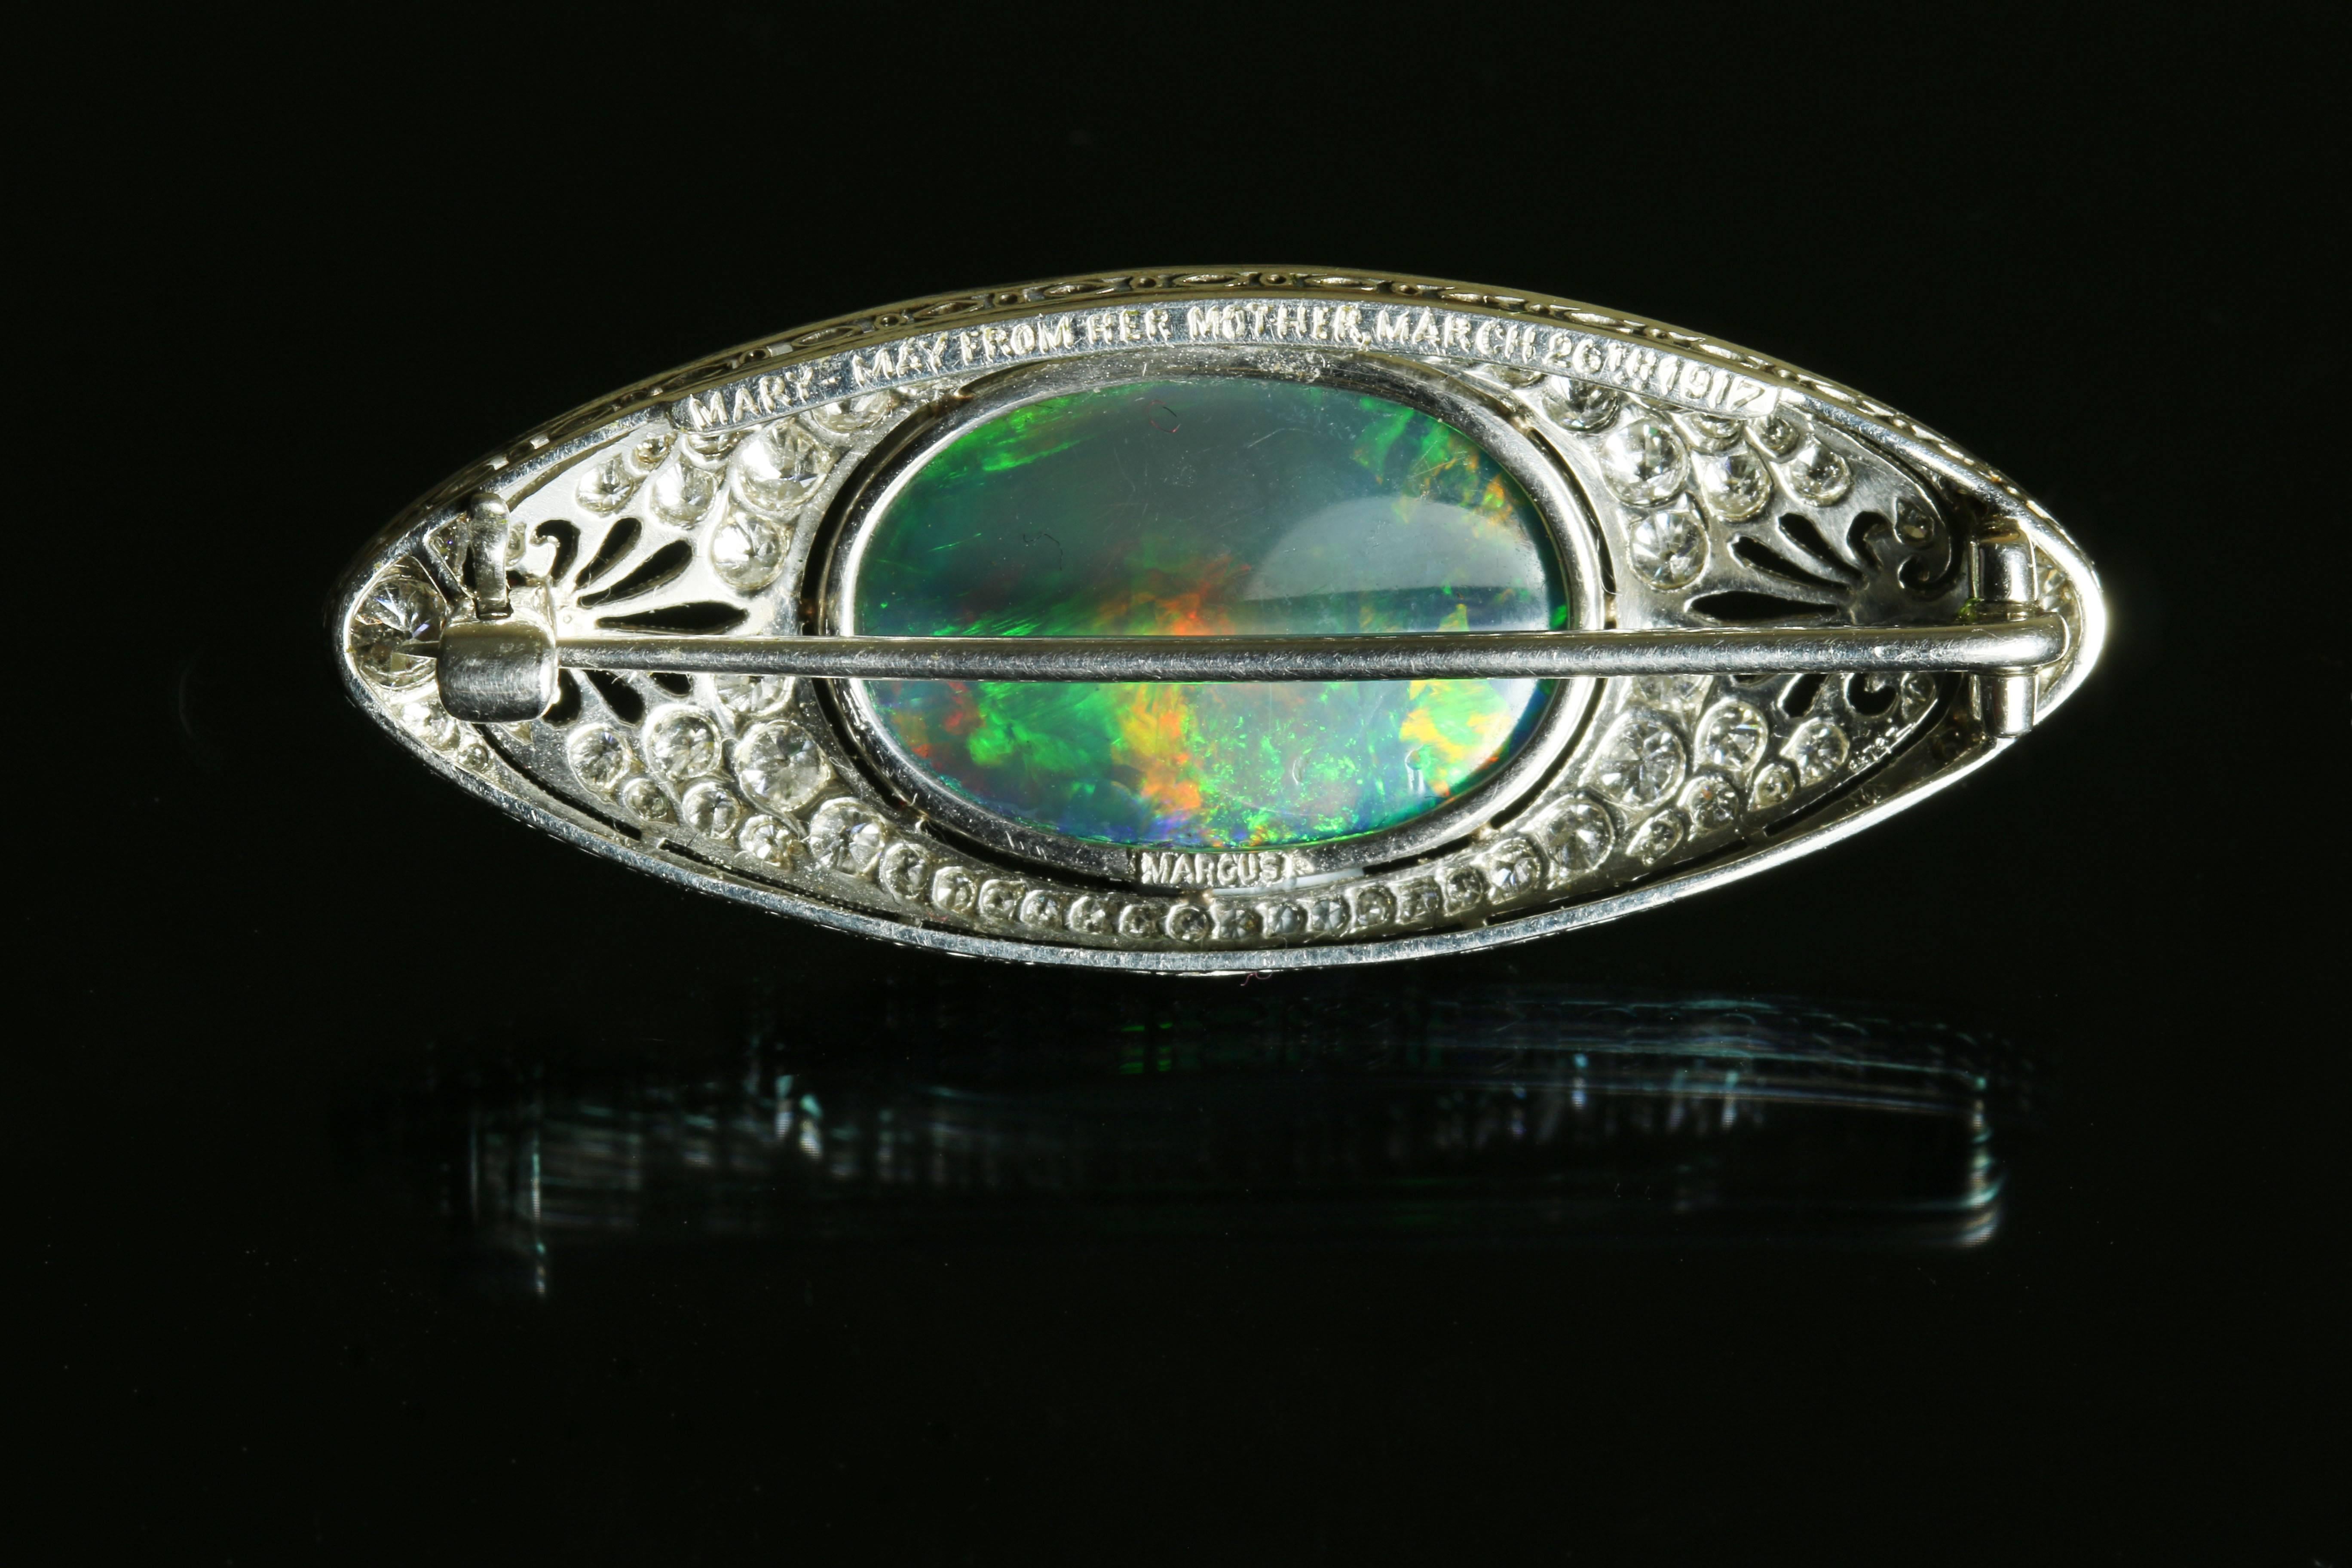 This is a stunning black opal brooch by the American maker, Marcus & Co. The black opal at the centre is truly special as stones with this even distribution of colour along with this mix of reds, greens and blues are very rare. 

The main stone